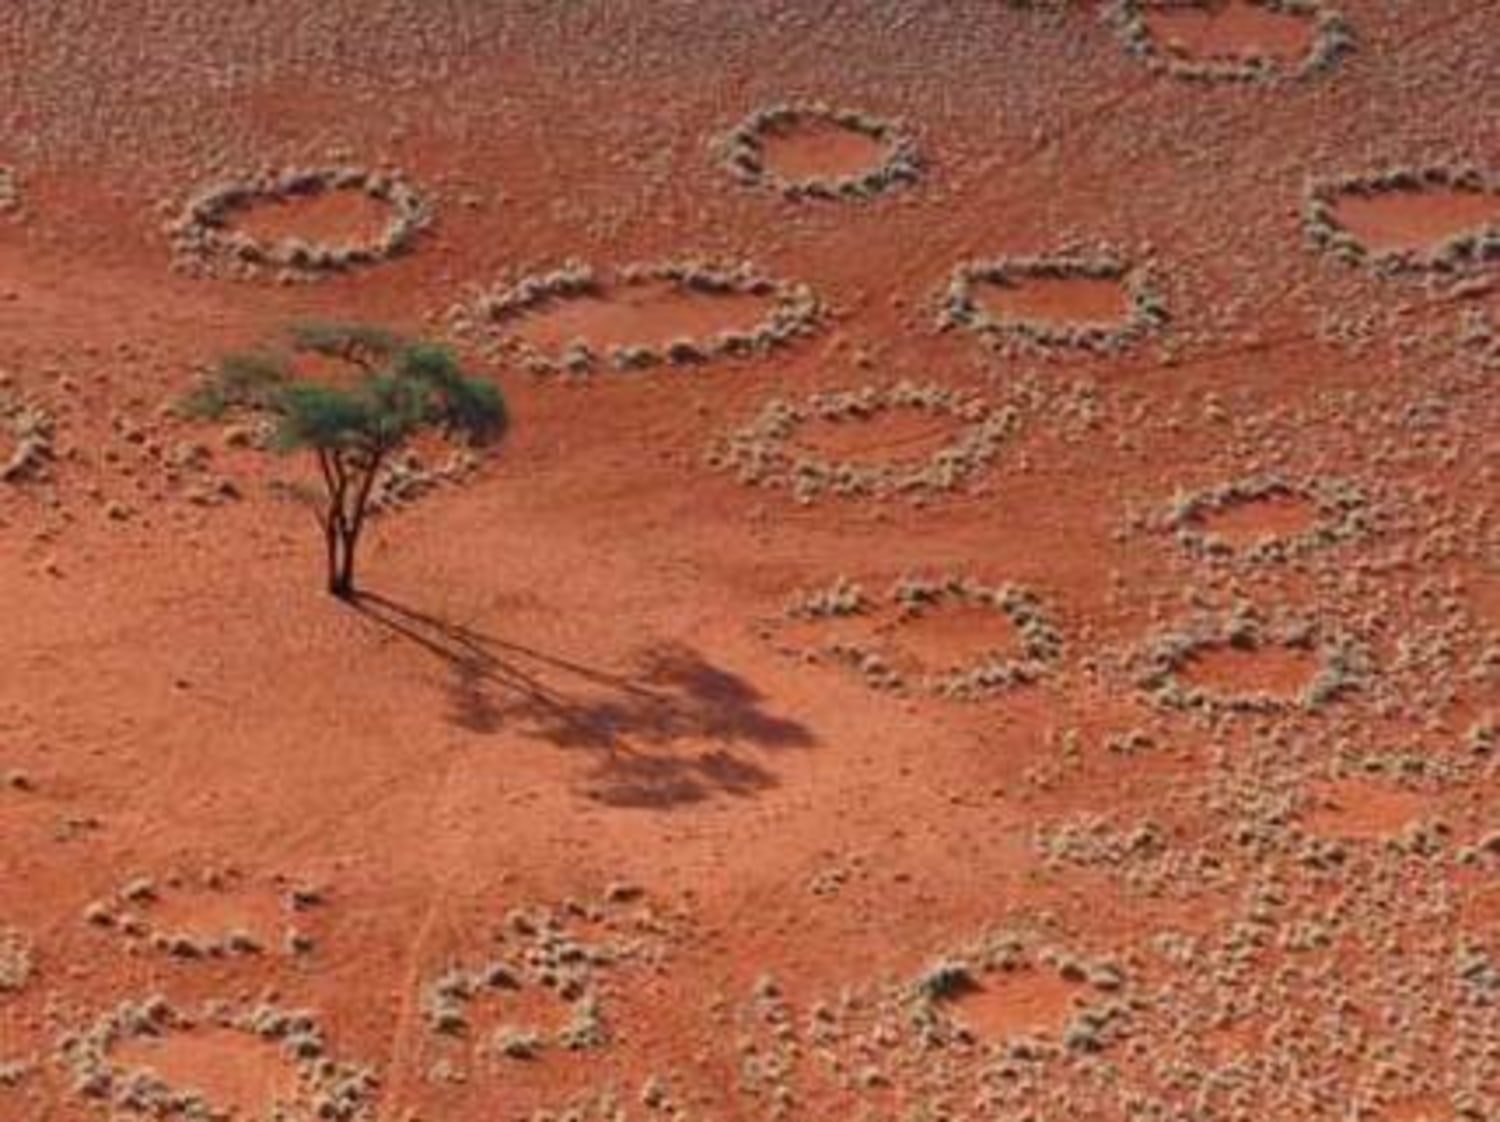 A Mystery Circling the Desert, Fairy Circles in Namibia